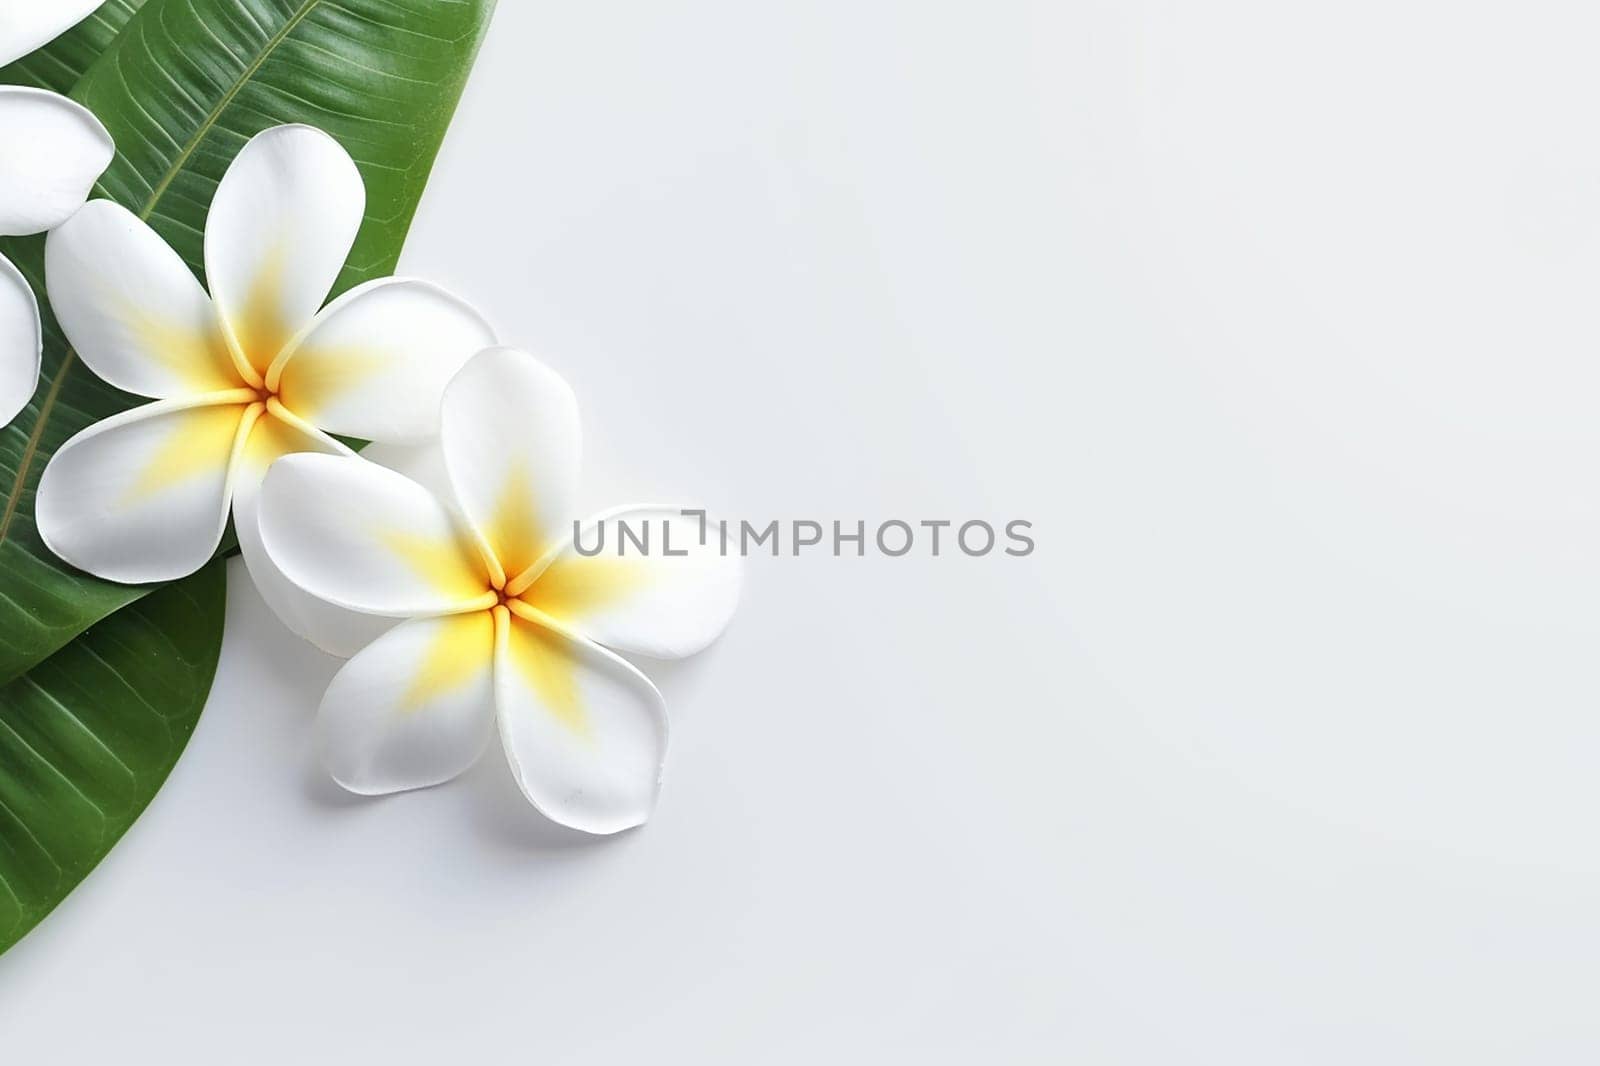 Two white and yellow plumeria flowers beside a green leaf on white background. by Hype2art